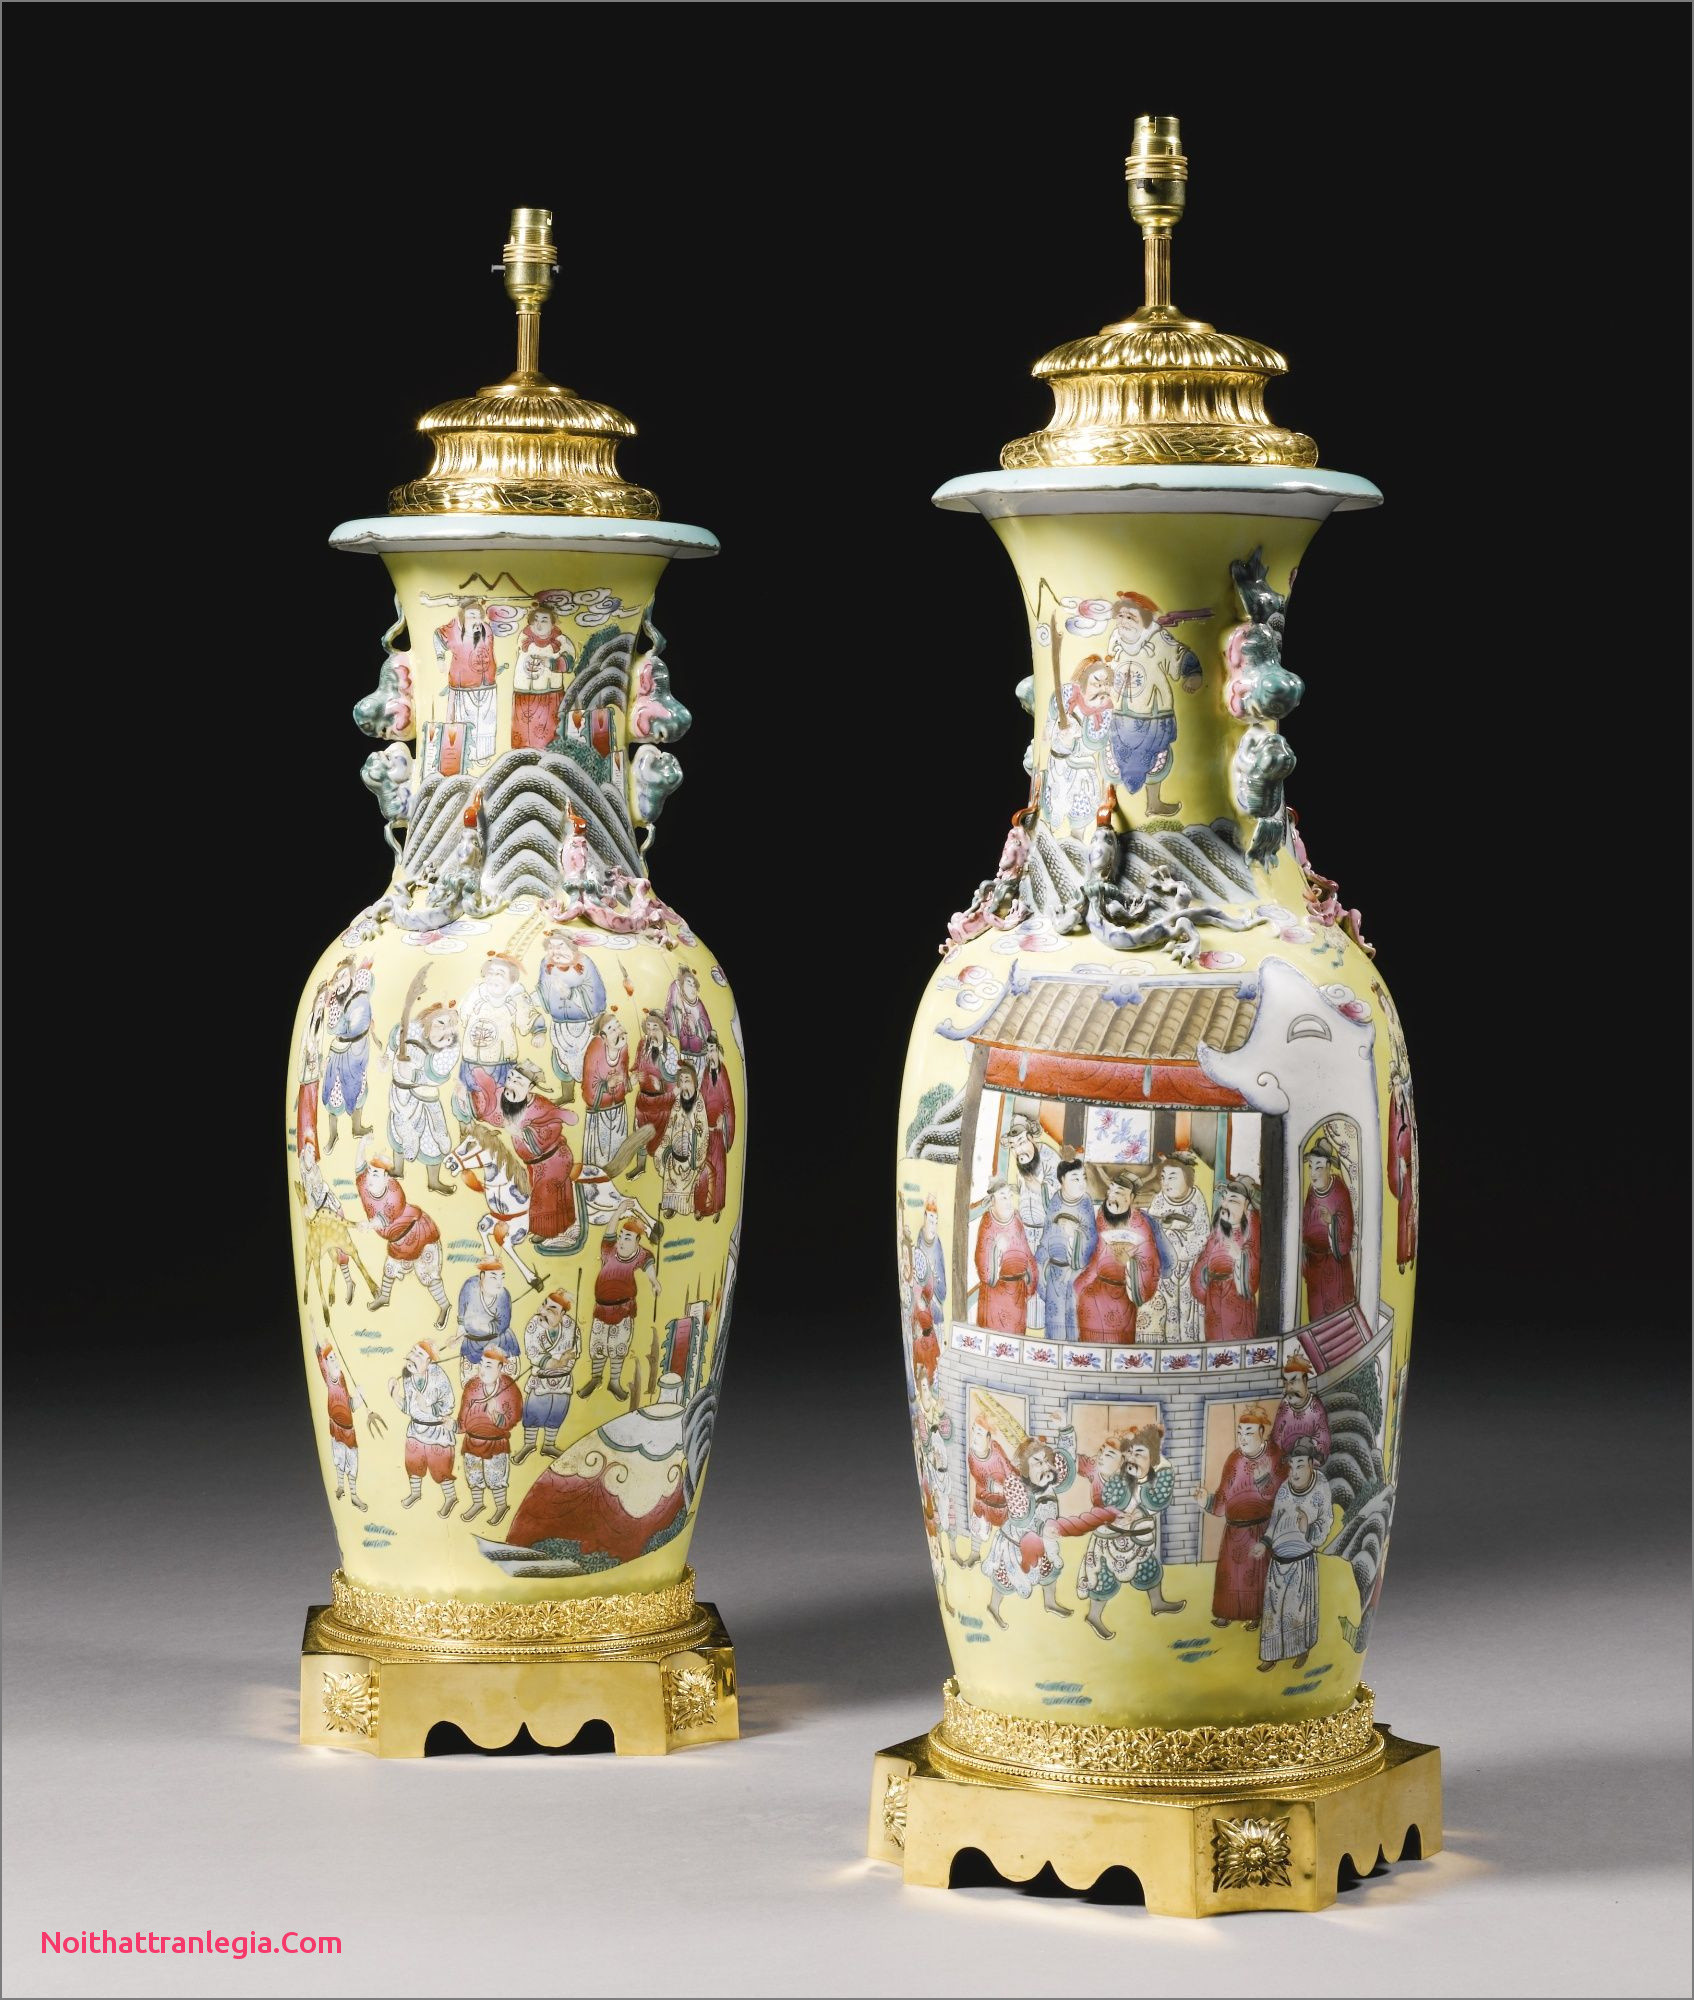 20 Nice asian Vases for Sale 2024 free download asian vases for sale of 20 chinese antique vase noithattranlegia vases design in a pair of chinese porcelain vases sotheby s